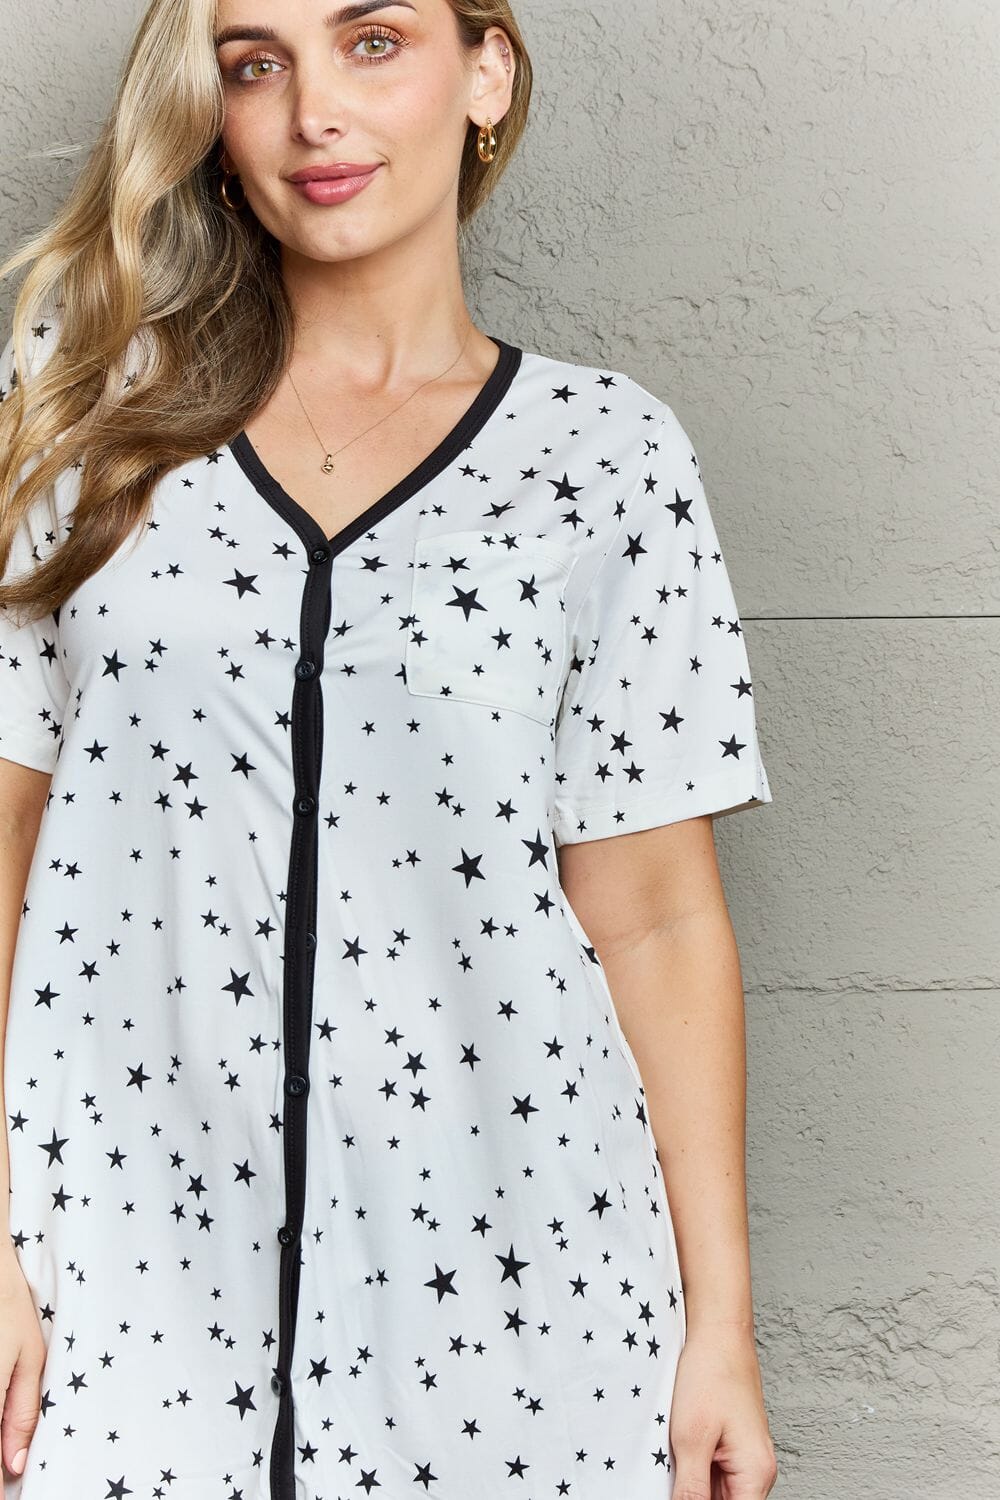 MOON NITE White Star V neck Short Sleeves Quilted Quivers Button Down Sleepwear Stretchy Dress Sleepwear & Loungewear jehouze 